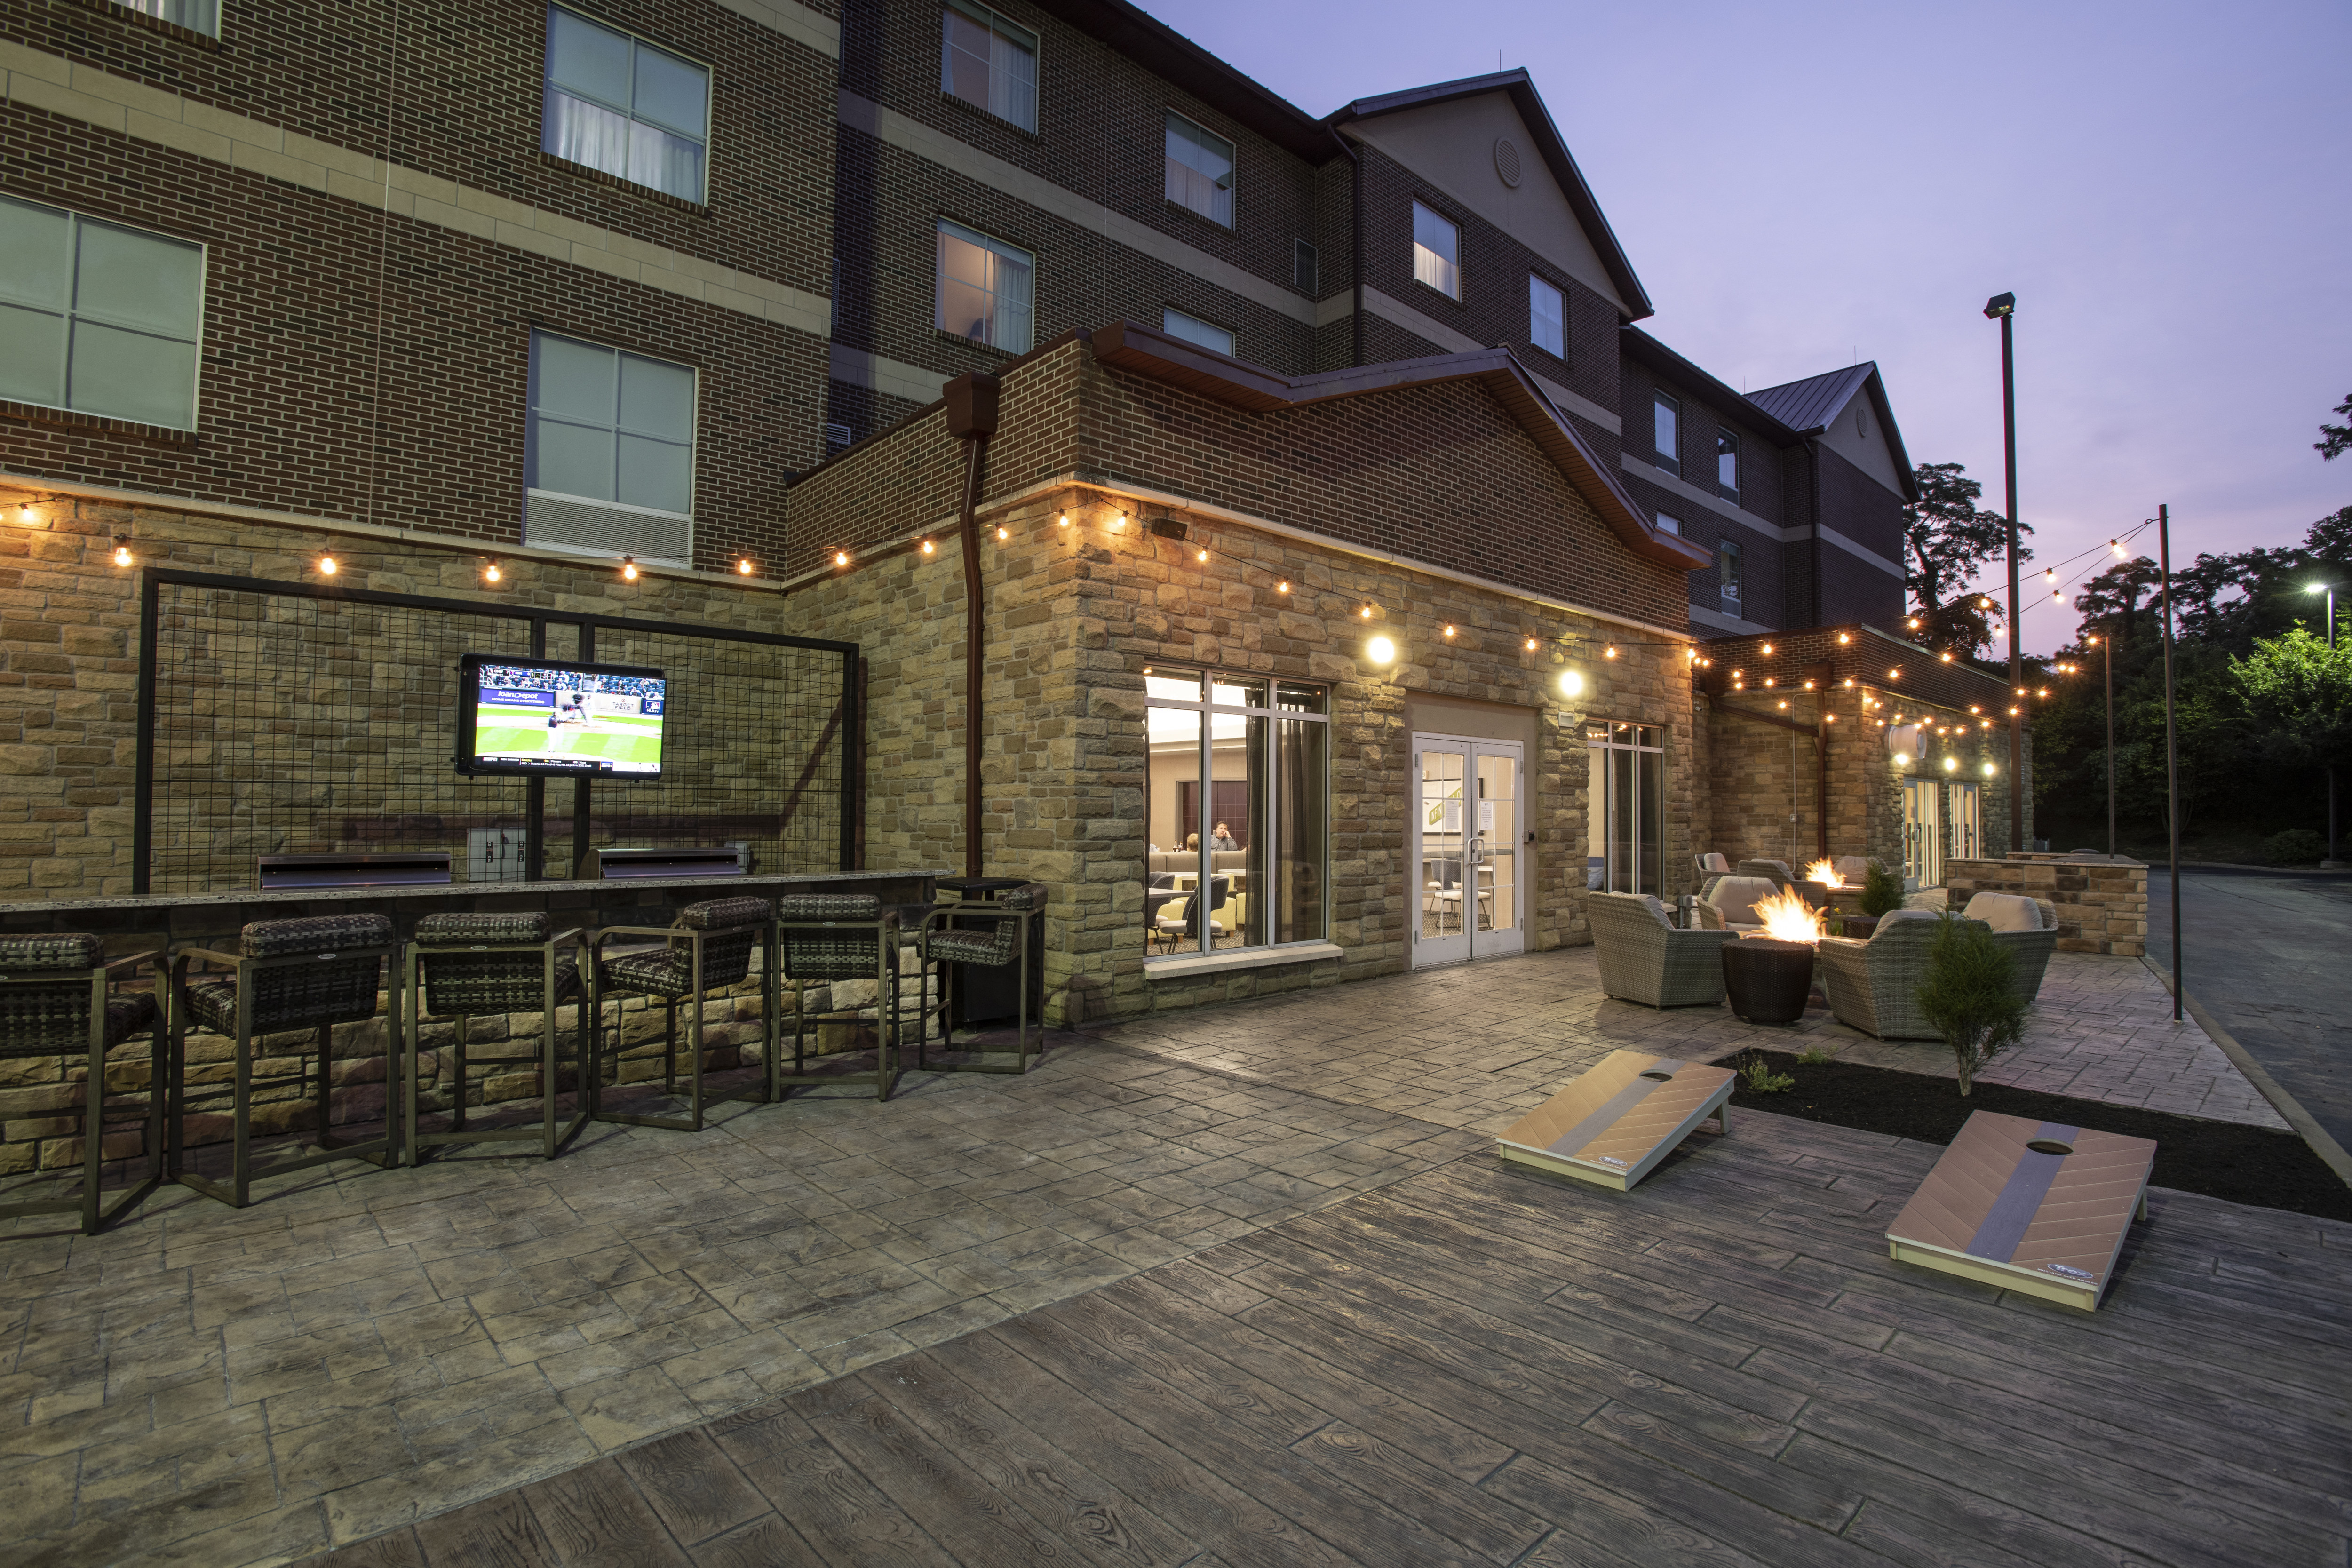 View Outdoor Patio with Fire Pit  and HDTV in the Evening